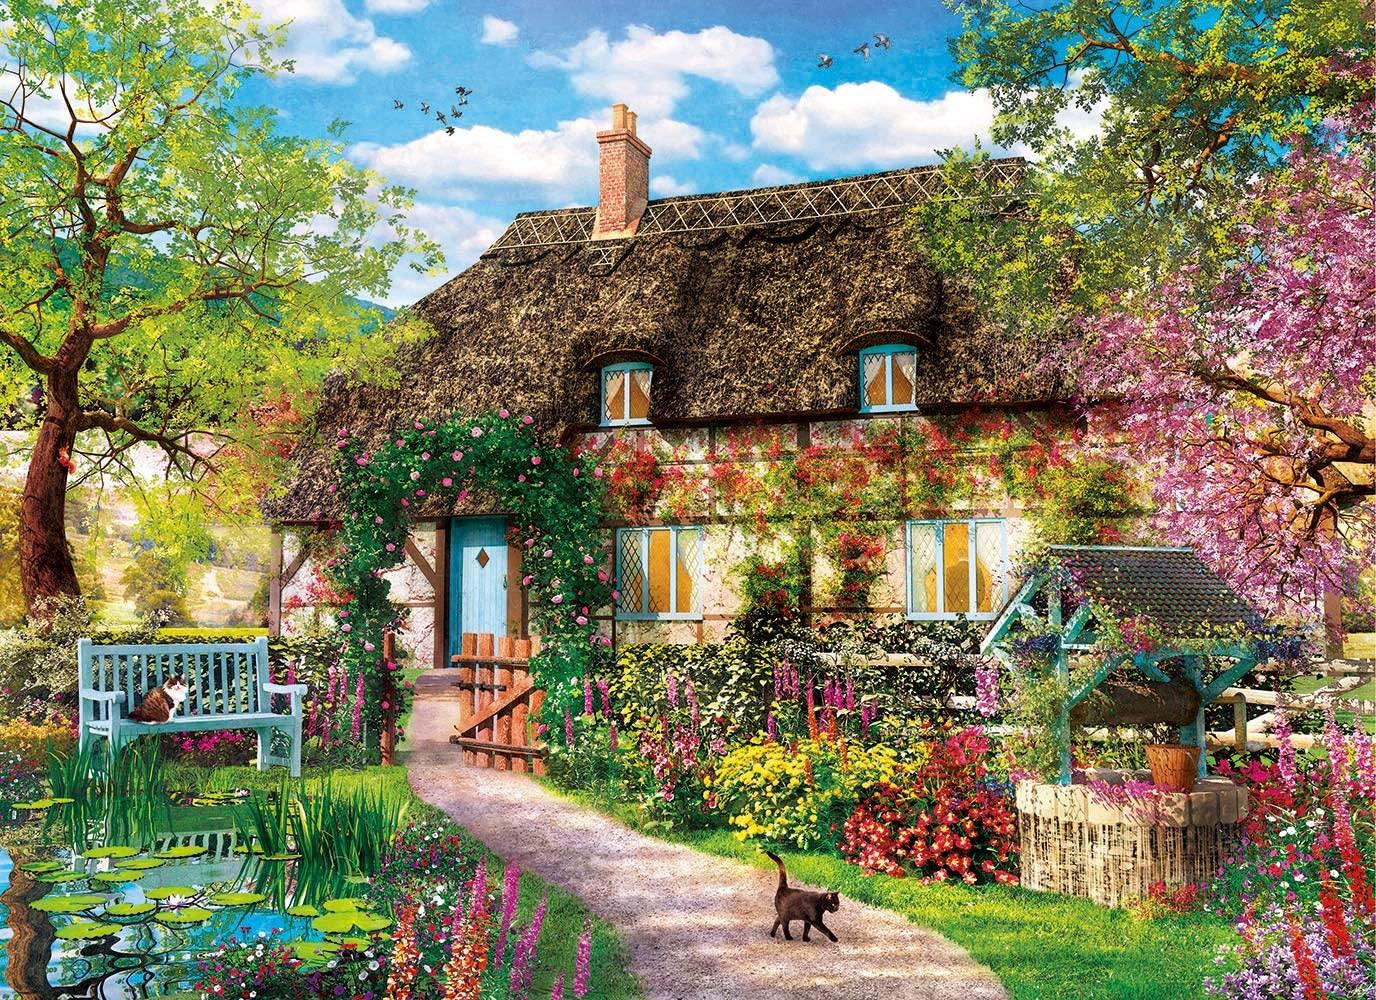 Clementoni The Old Cottage High Quality Jigsaw Puzzle (1000 Pieces)